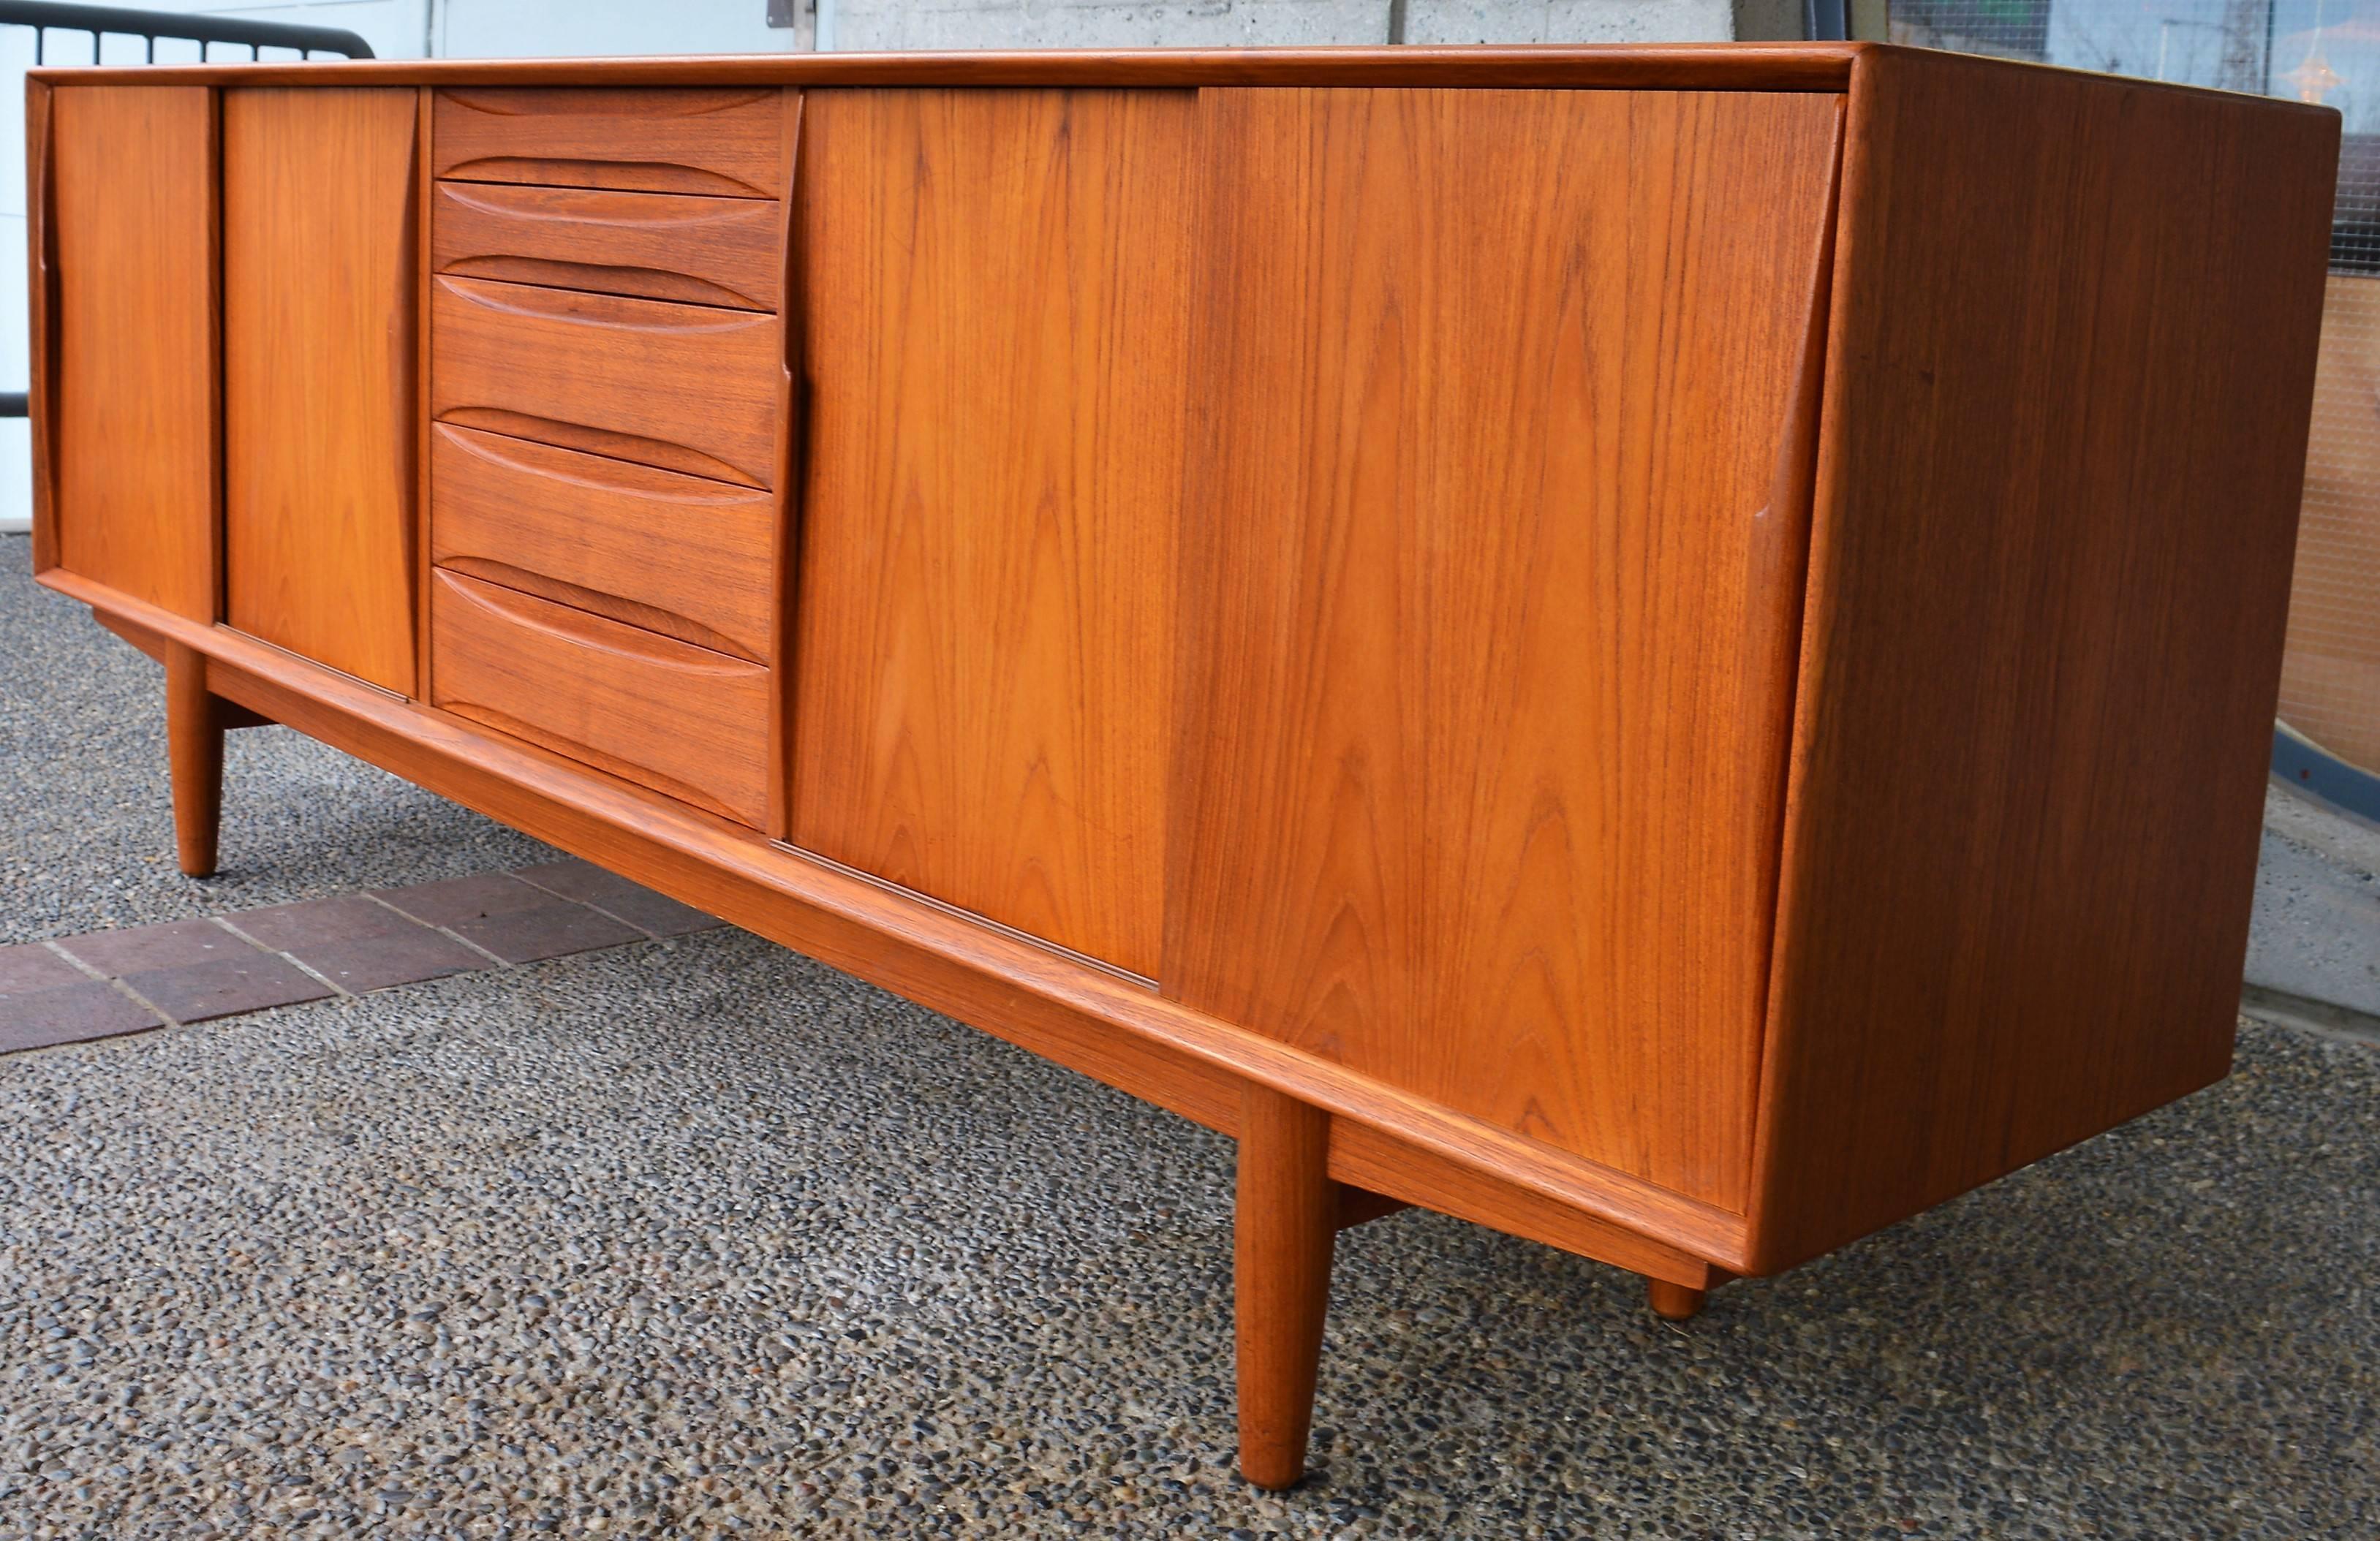 This impeccable Danish Modern teak buffet is exquisite throughout and was inspired by Arne Vodder for Dyrlund. Featuring a center bank of bow-tie shaped drawers, with all hardwood construction and dovetail joins (the top two are slimmer and felt